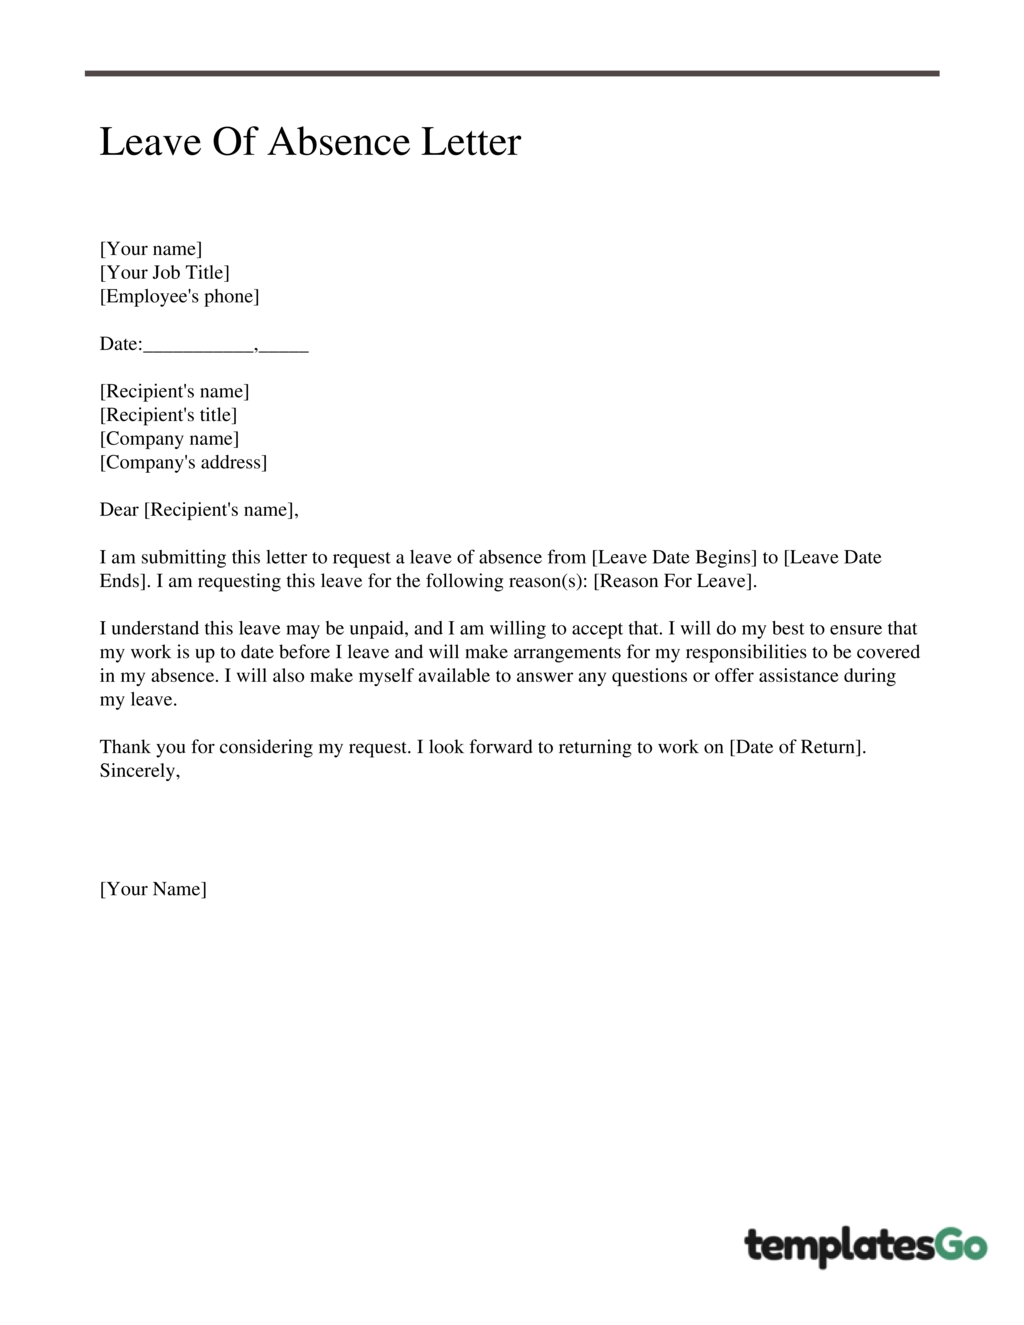 Leave Of Absence Letter Request With Template Examples 3018